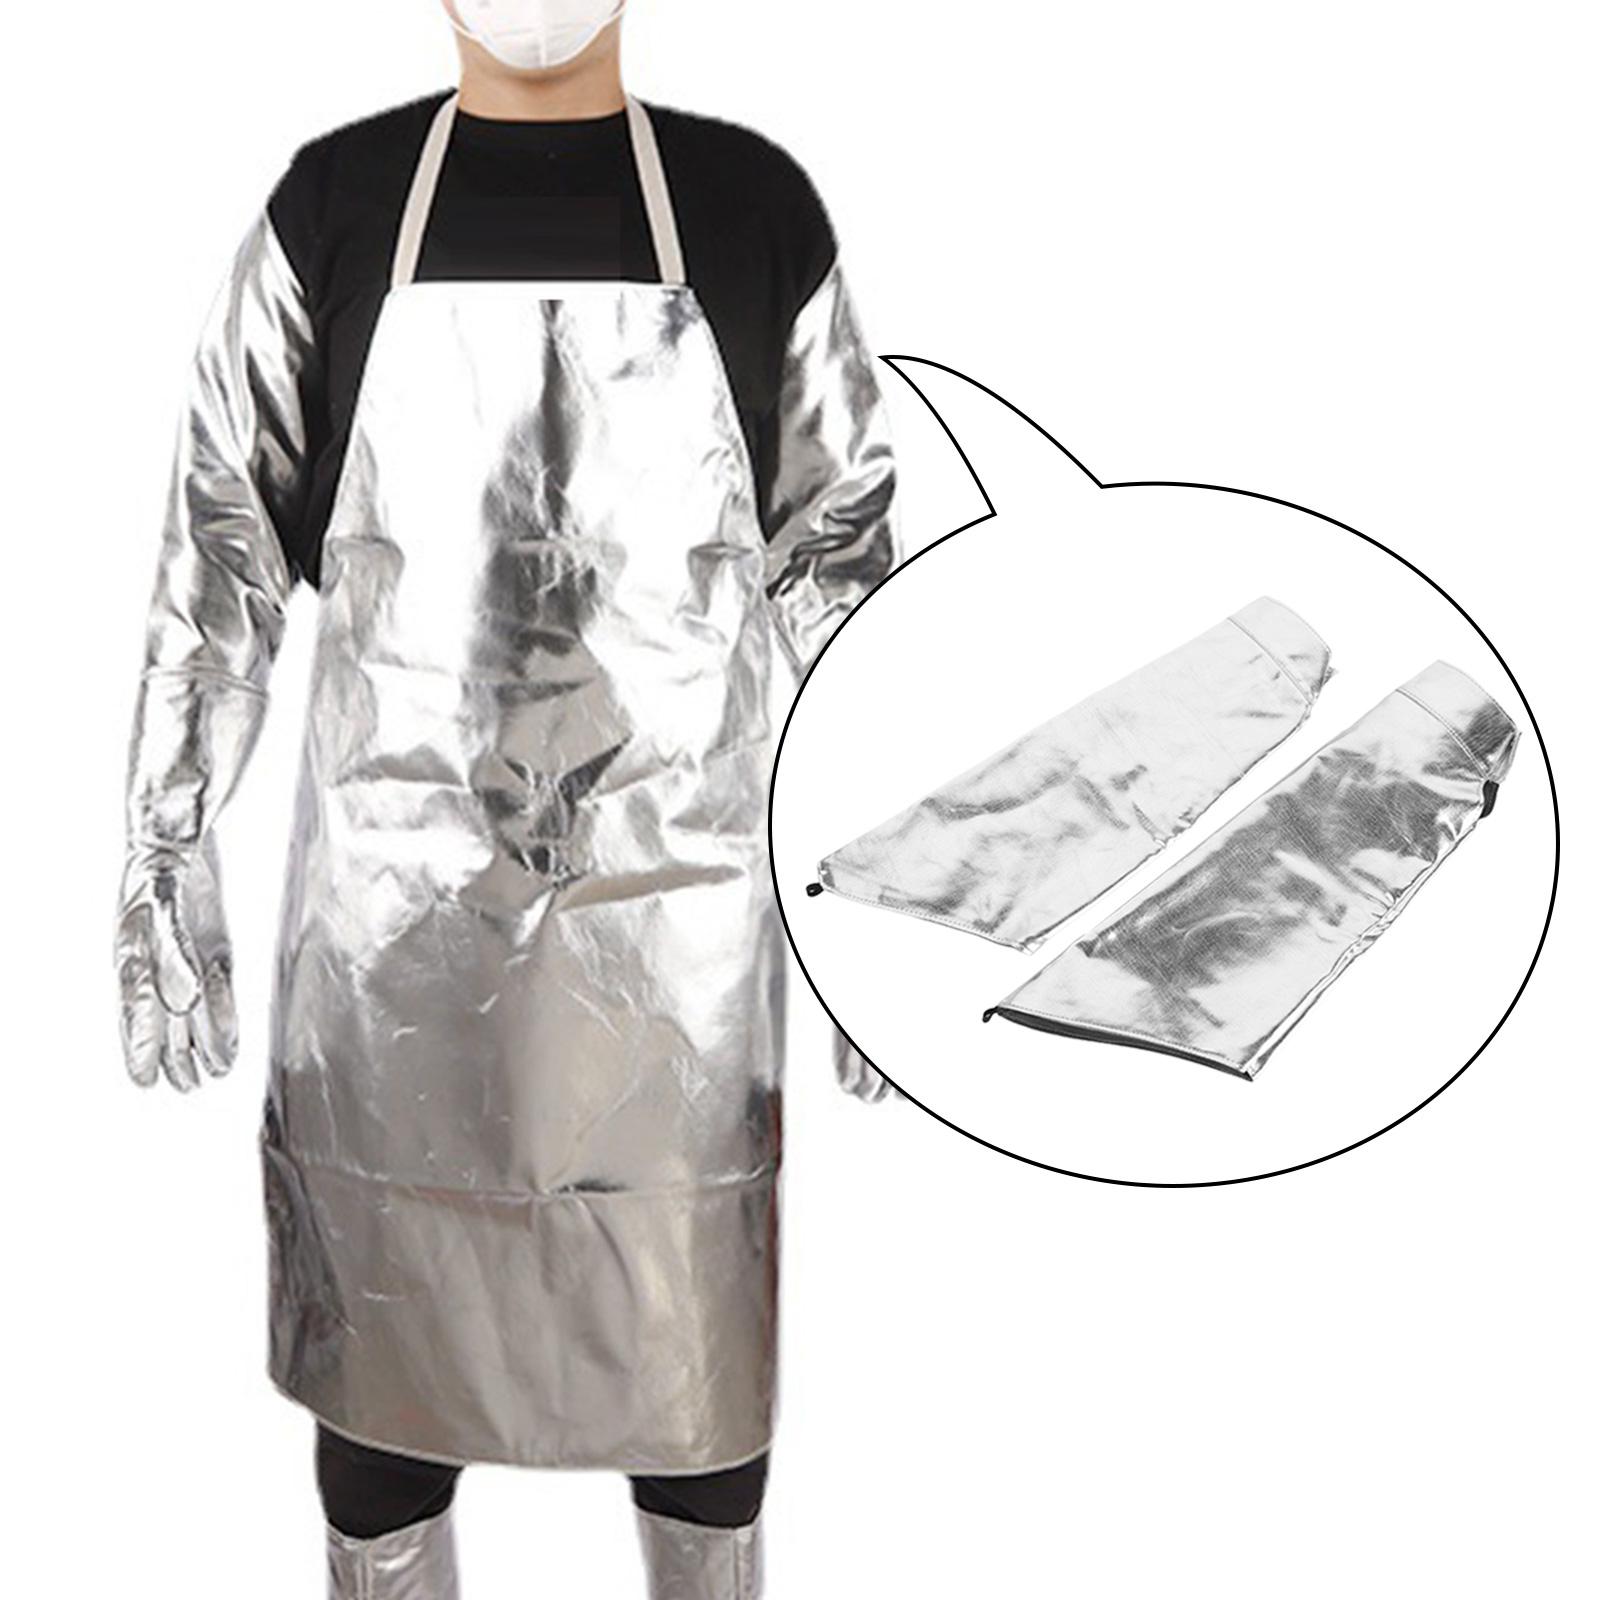 2 Pieces Aluminum Foil Aprons Foot Guards for Fish Cleaning lab Work sleeves